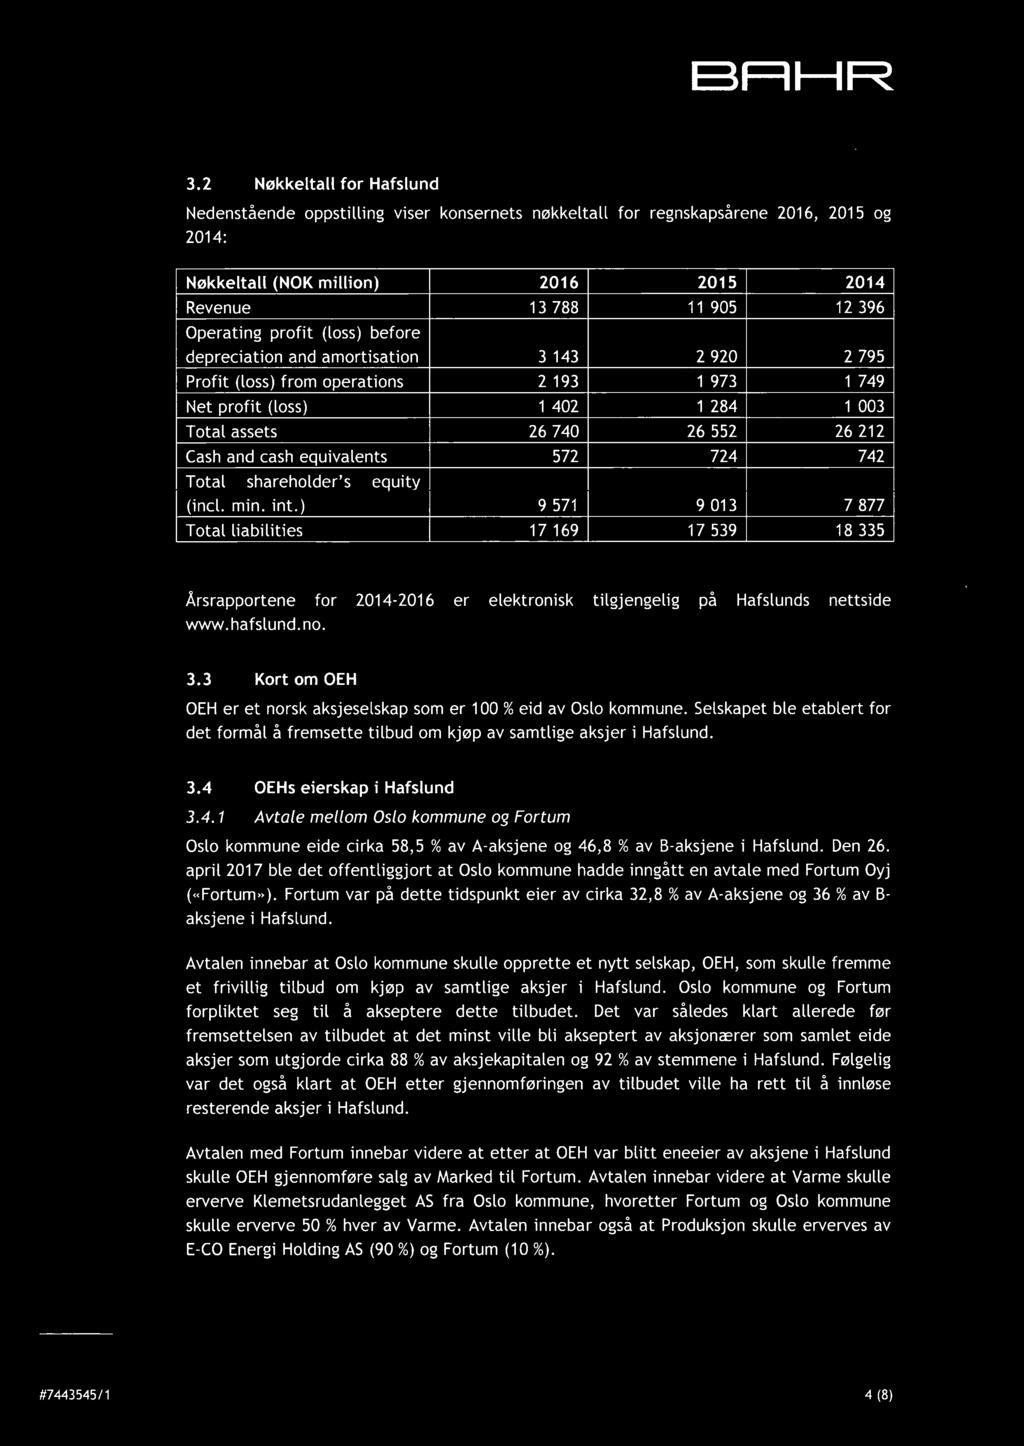 equivalents 572 724 742 Total shareholder's equity (incl. min. int.